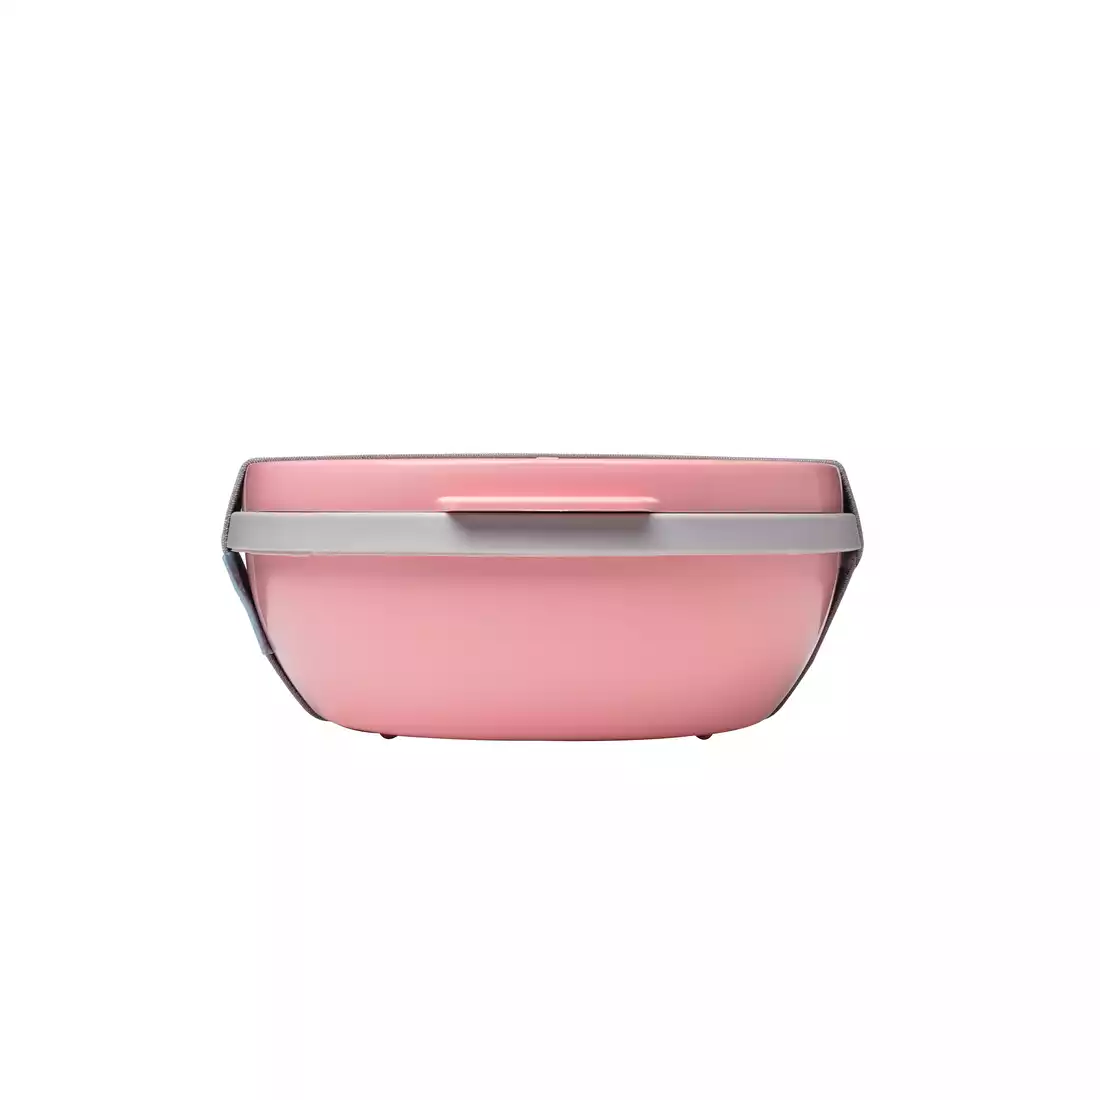 Mepal Ellipse Duo Nordic Pink lunchbox, roz